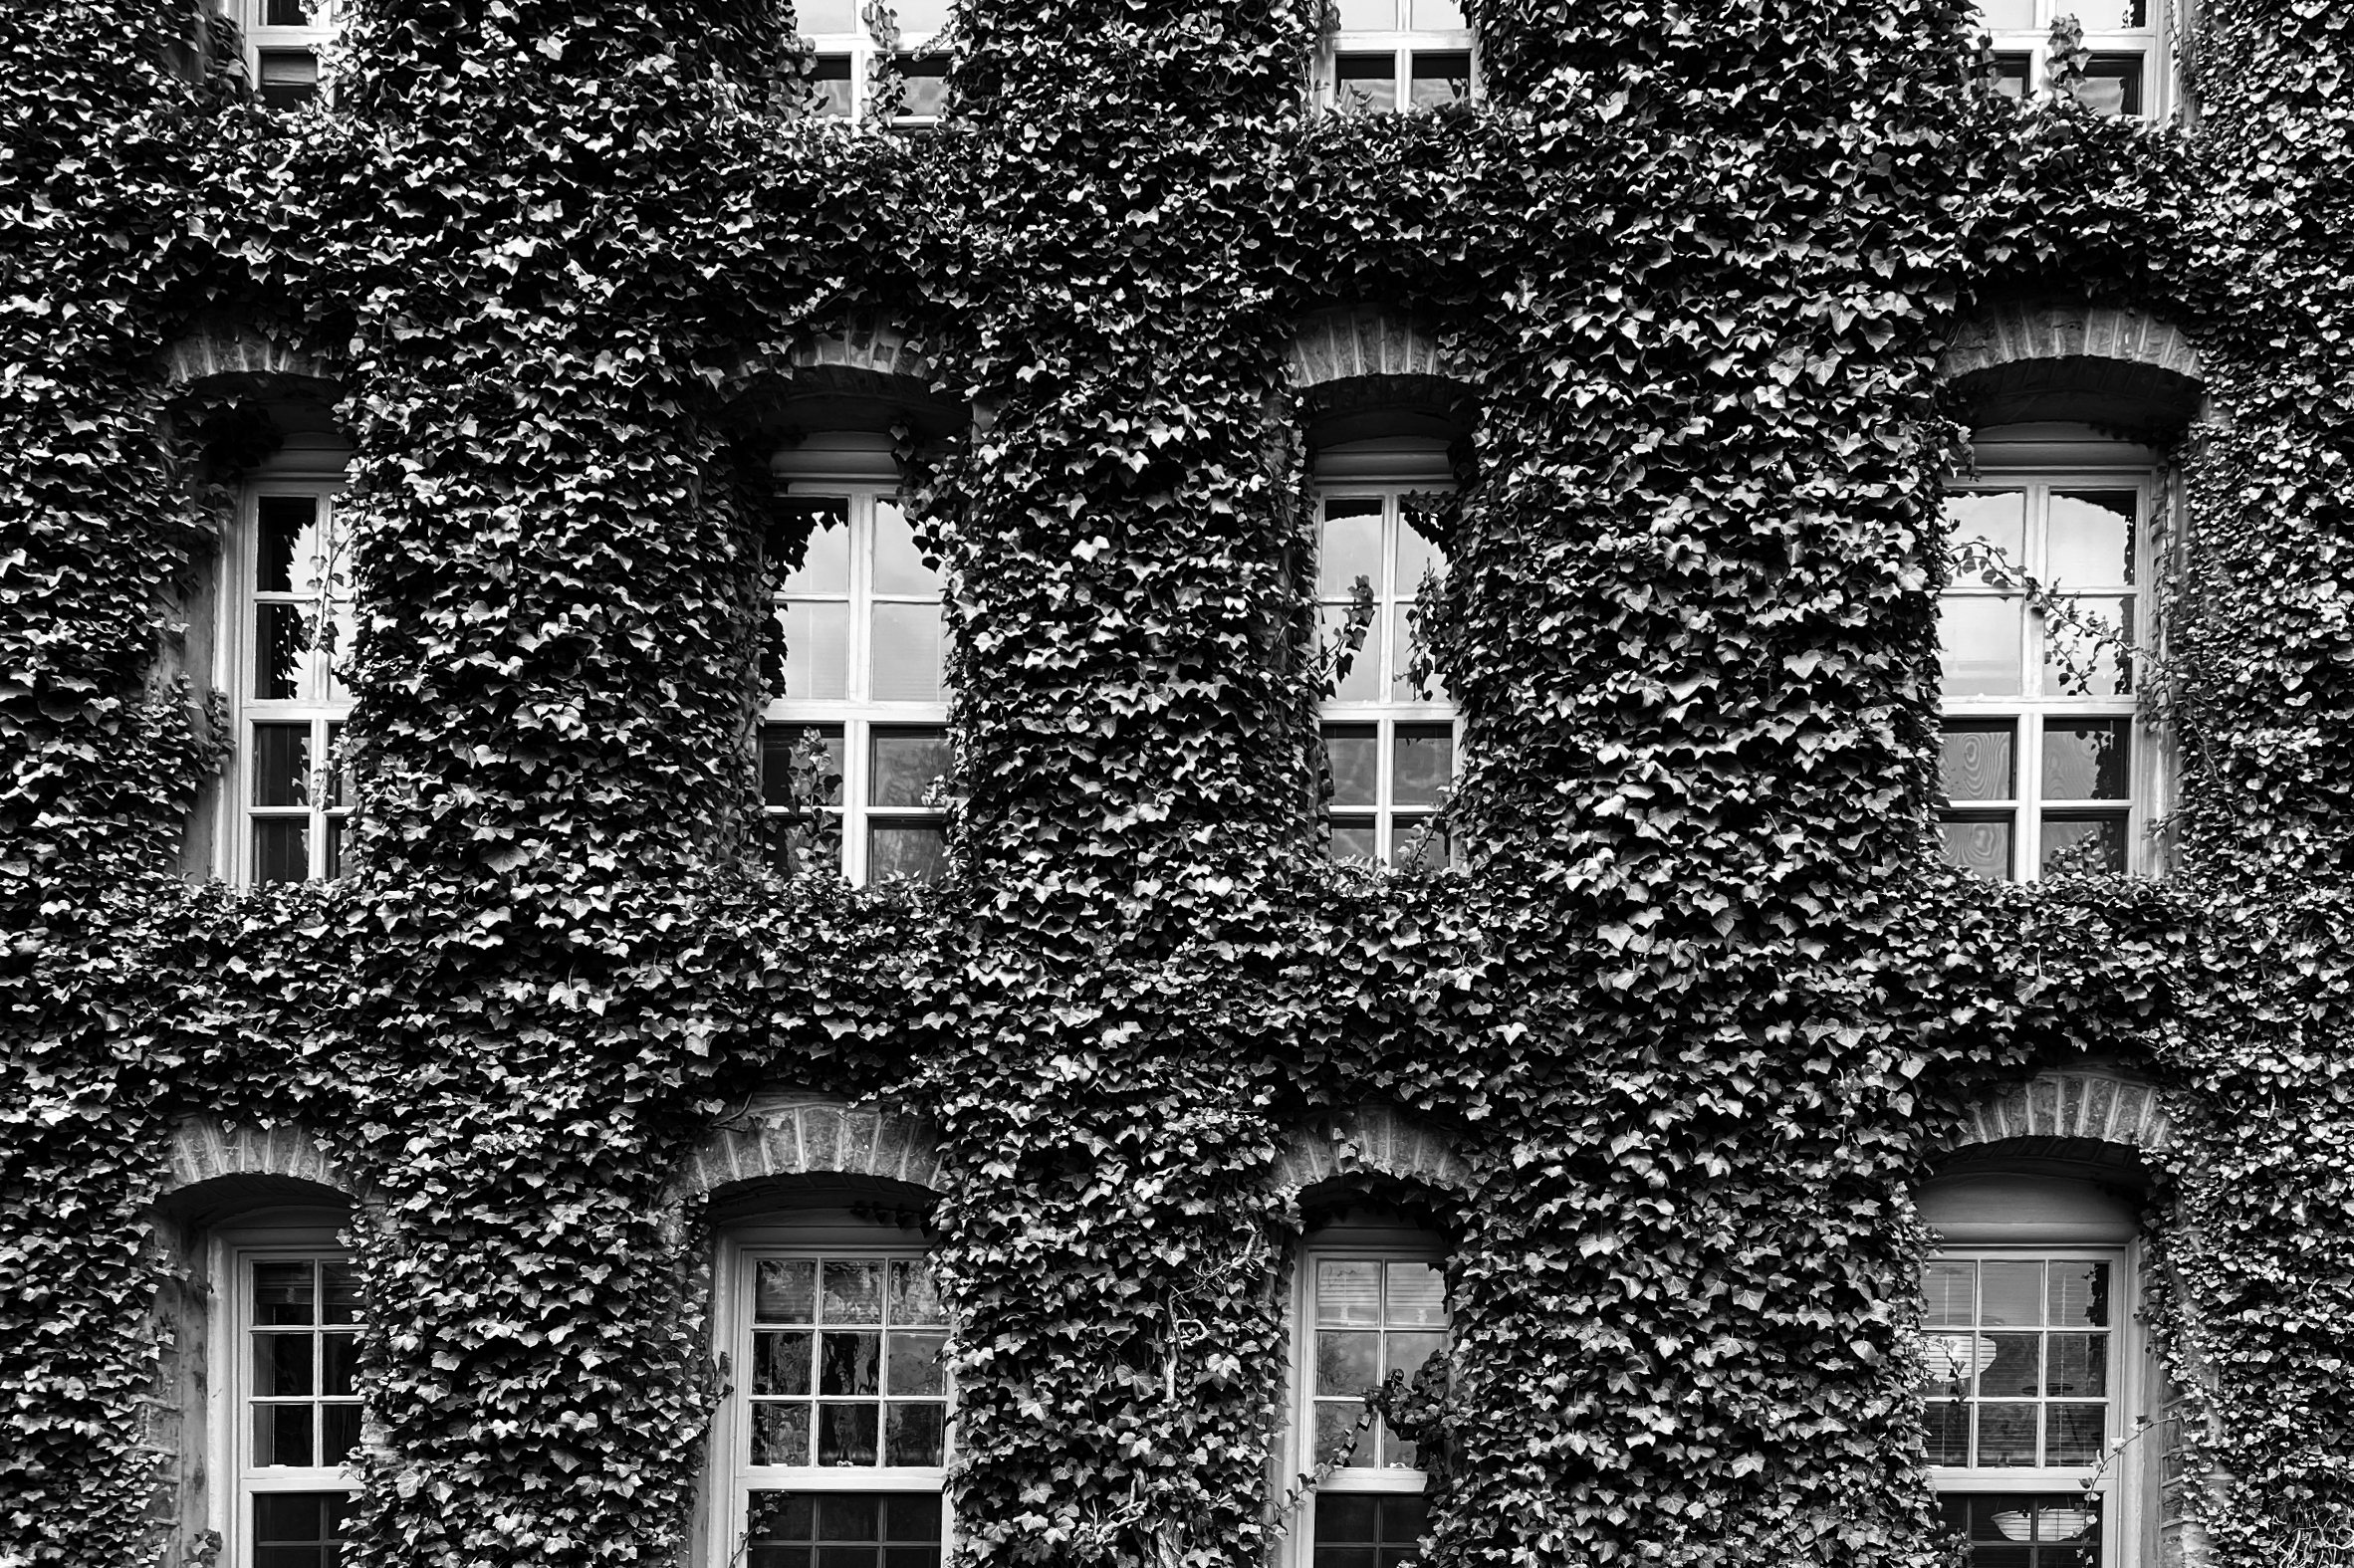 ivy covered building with rows of arched windows